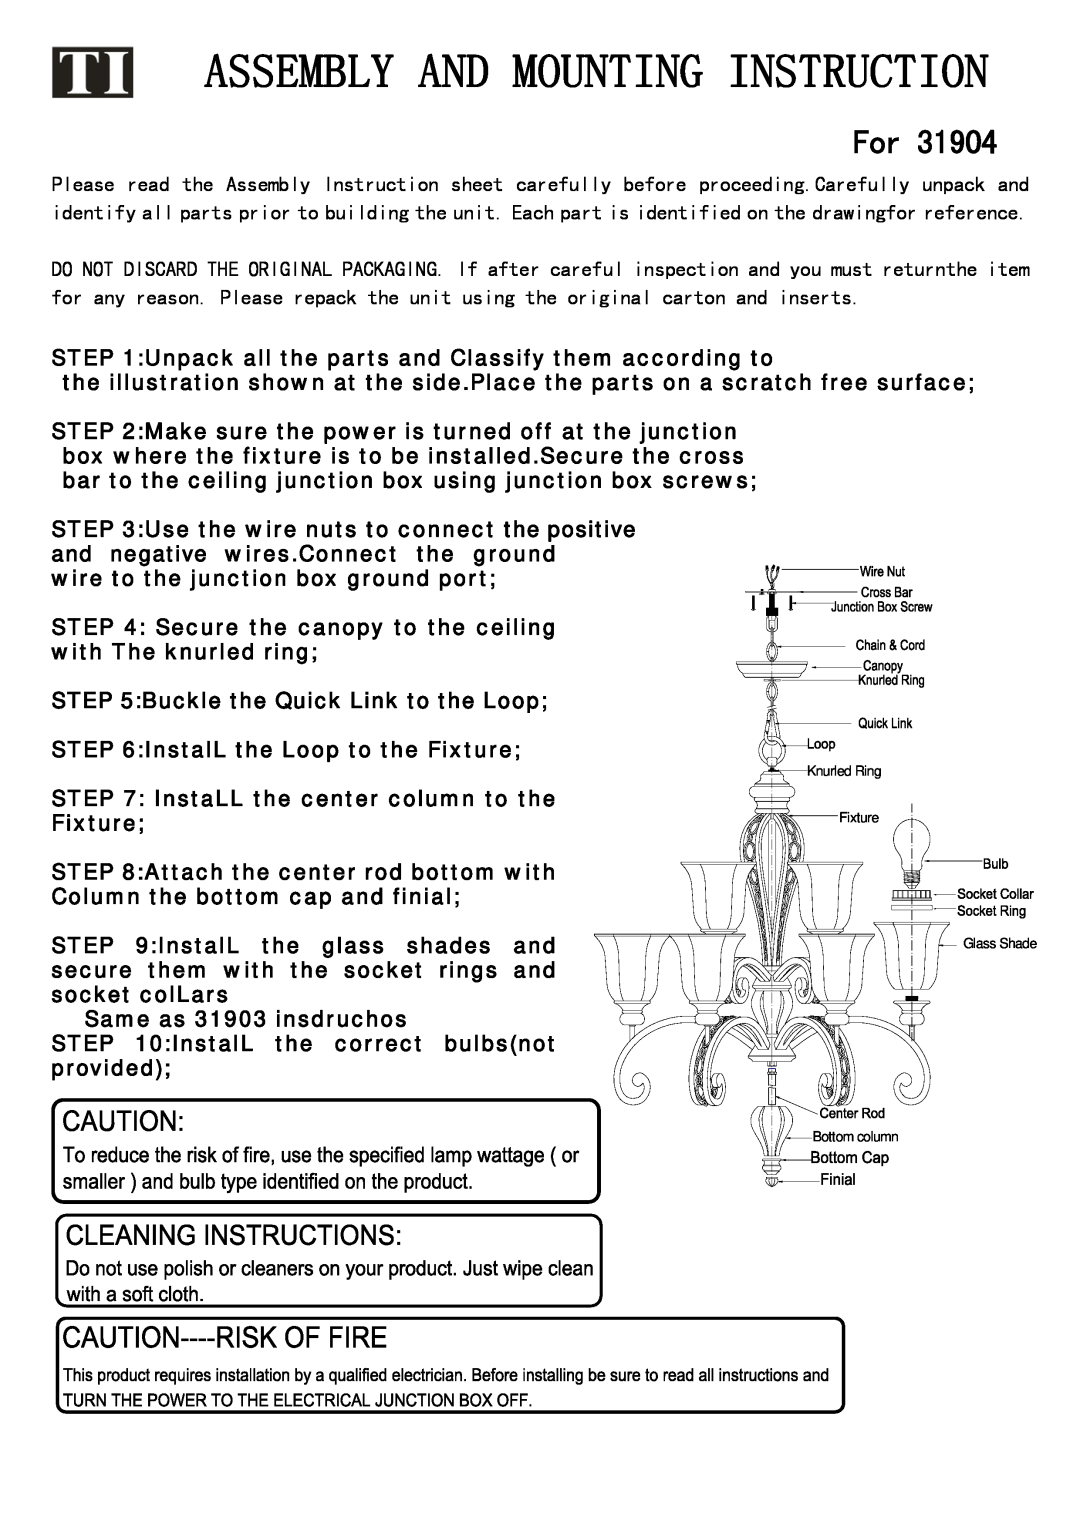 Triarch 31904 manual Assembly And Mounting Instruction 